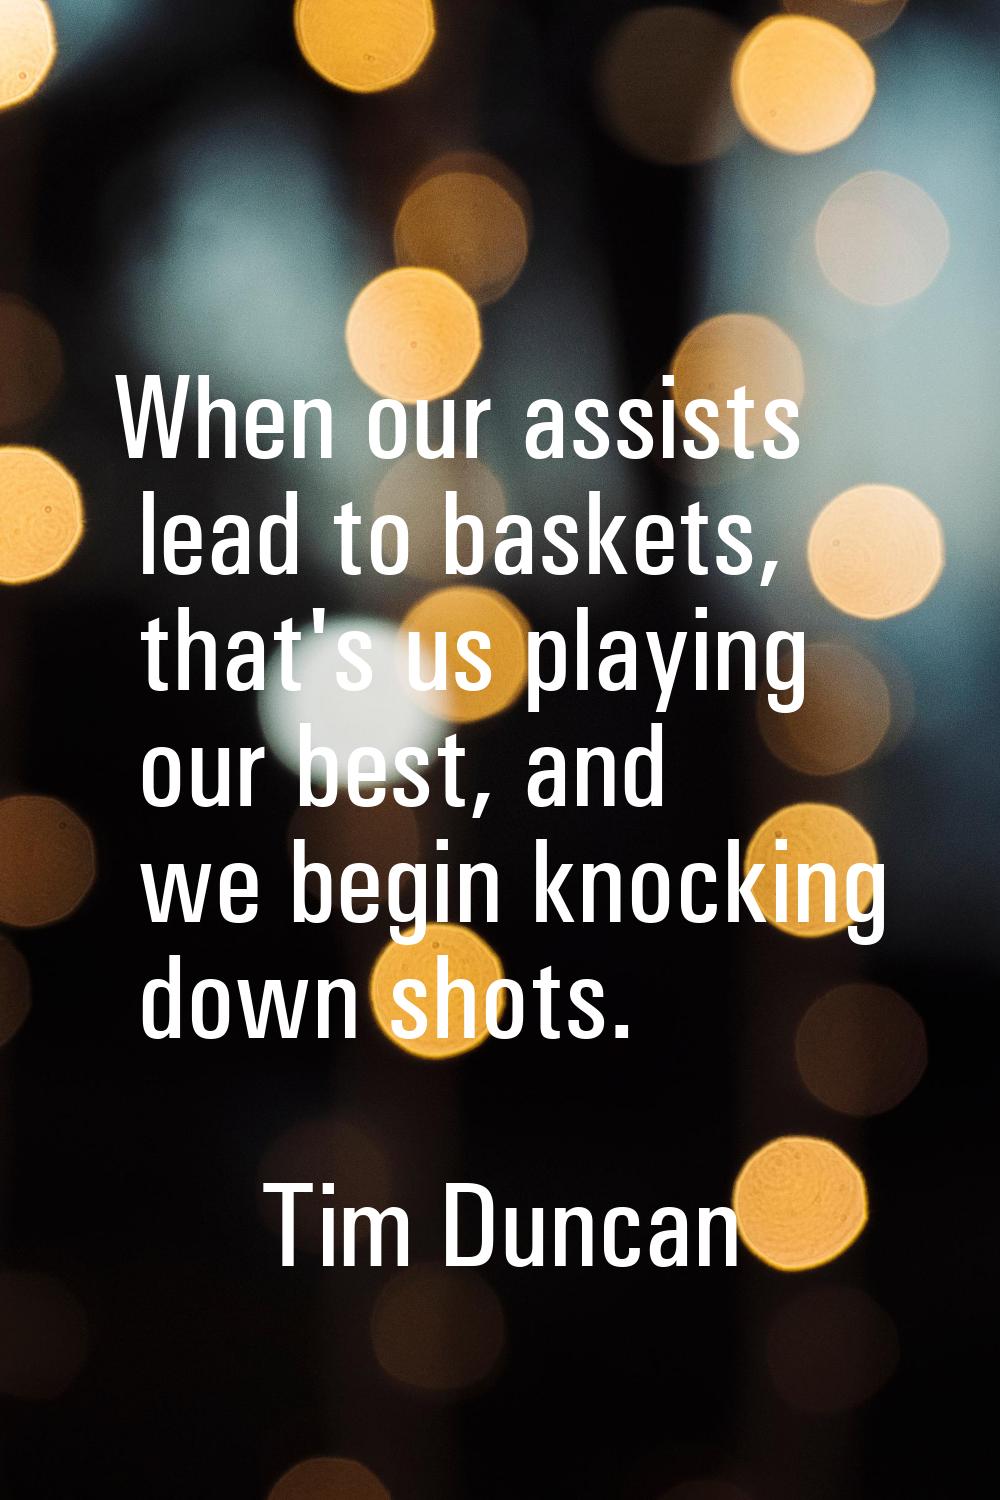 When our assists lead to baskets, that's us playing our best, and we begin knocking down shots.